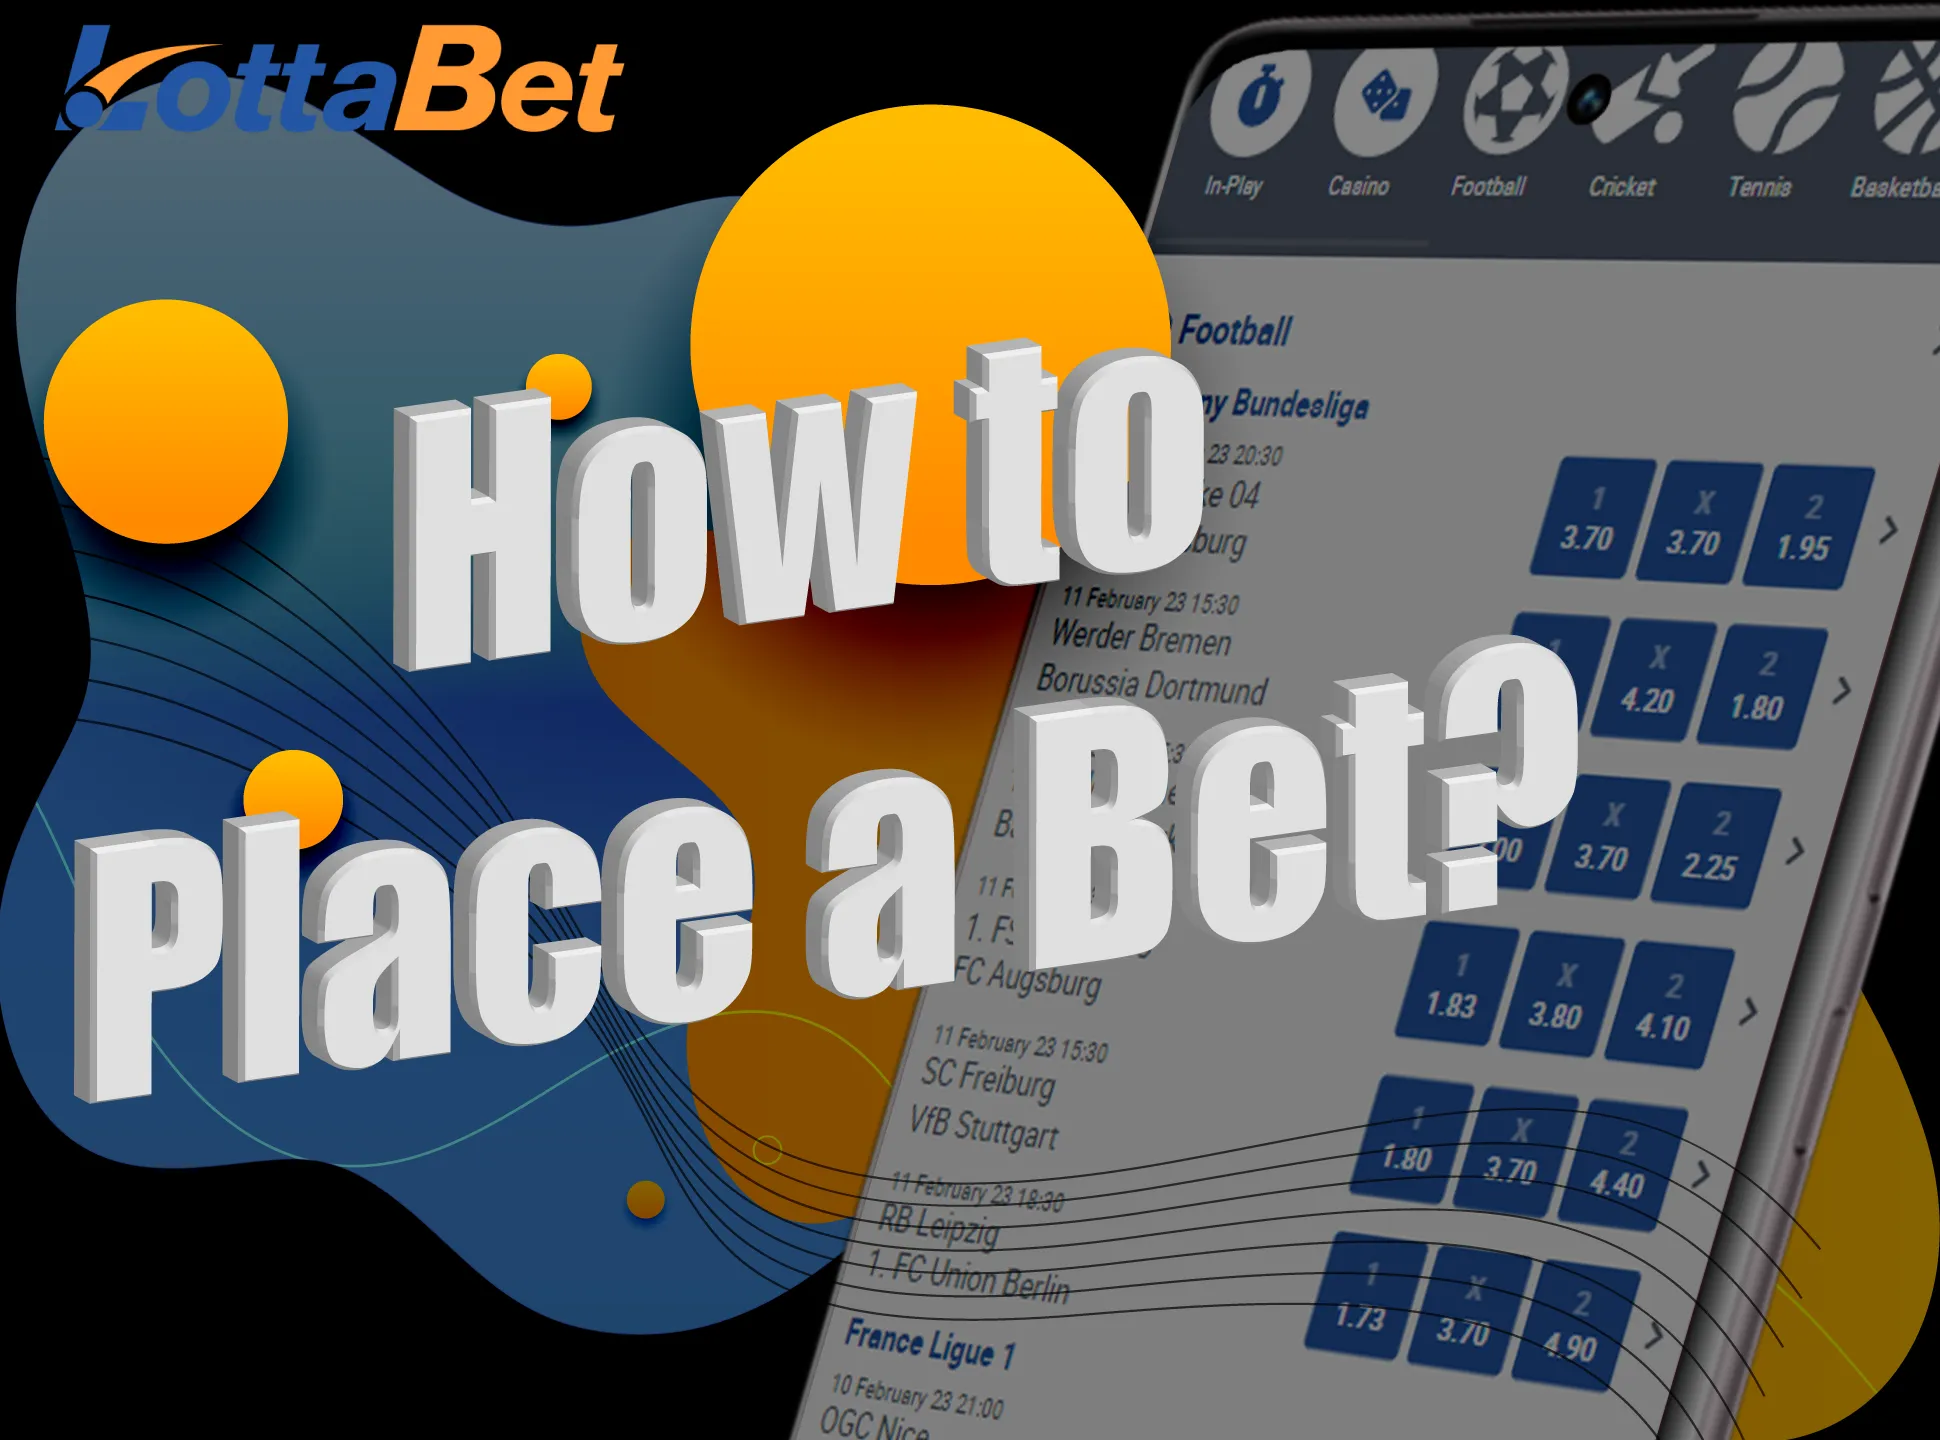 Go to the Lottabet website, create an account and place your first bet.